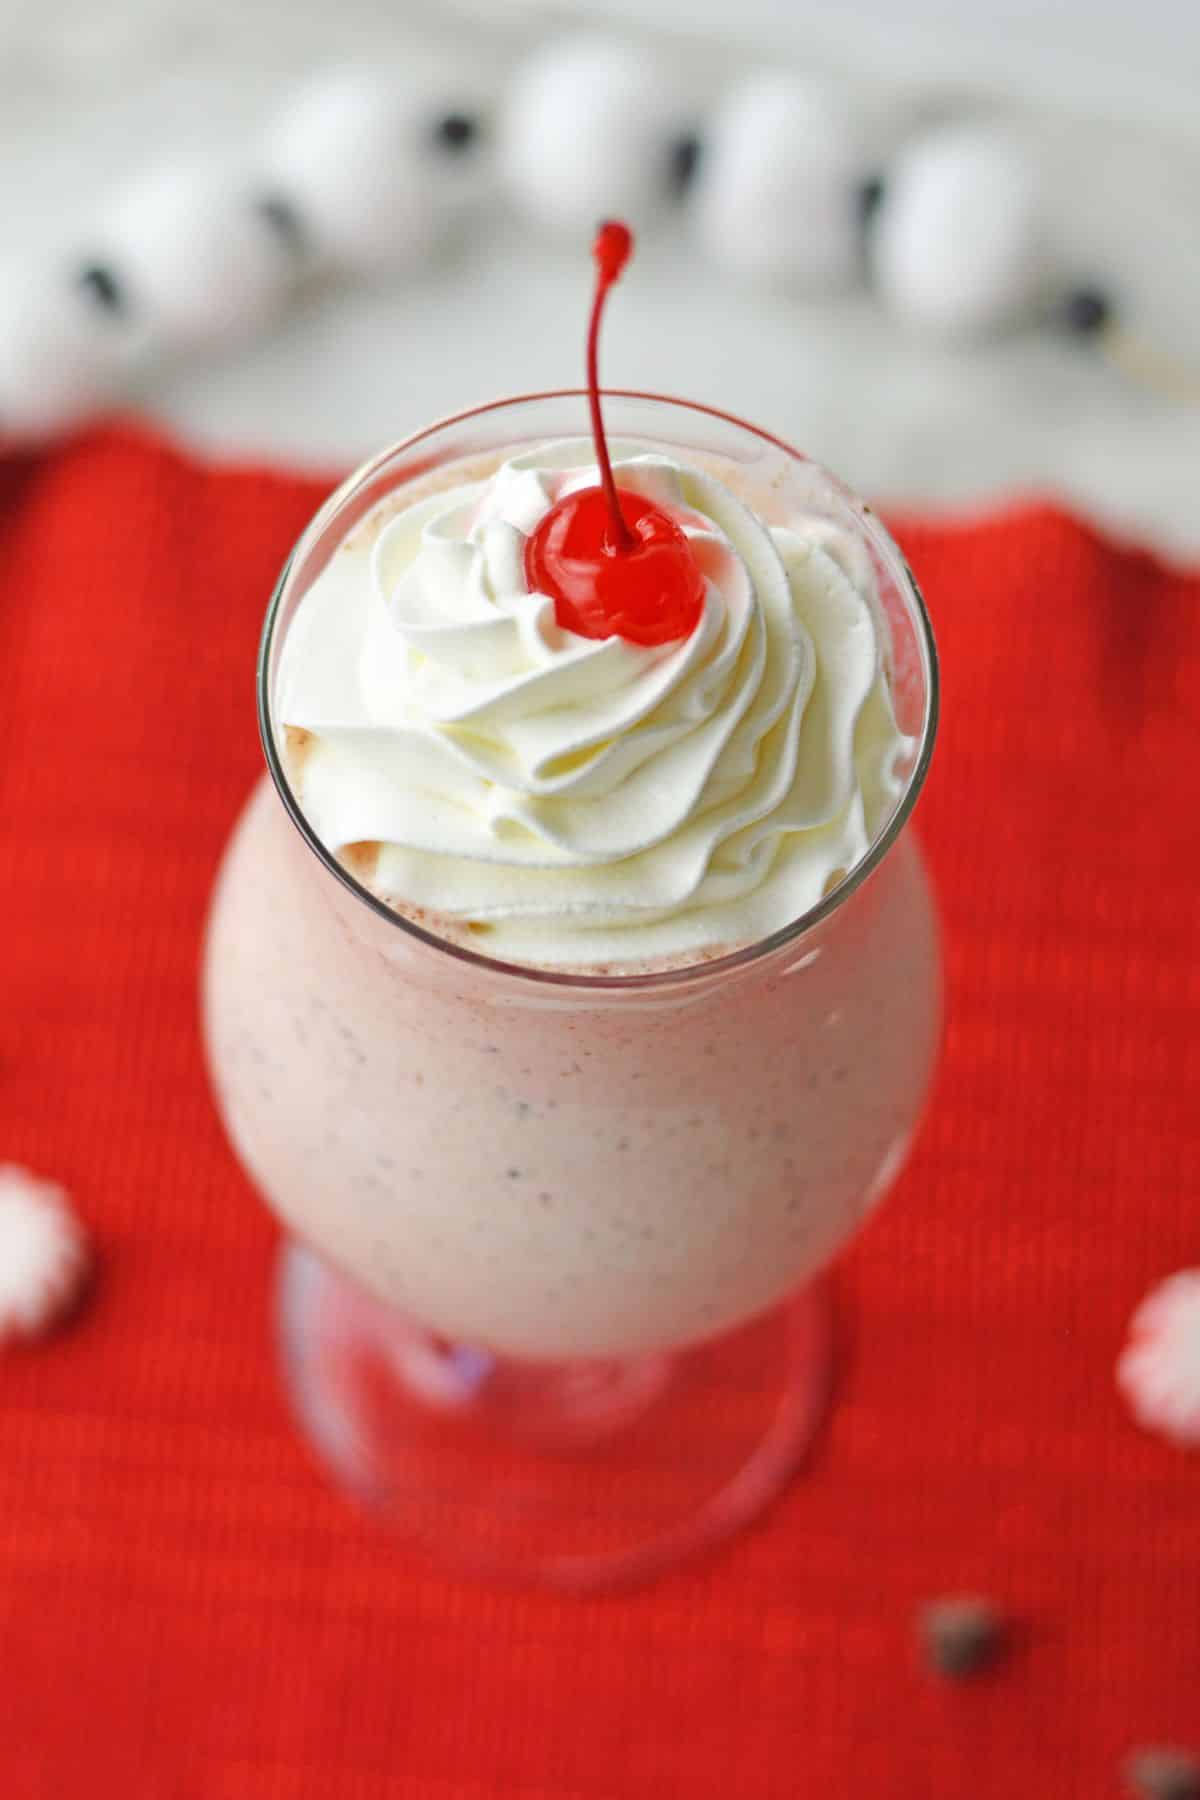 pink milkshake with whipped cream and a cherry